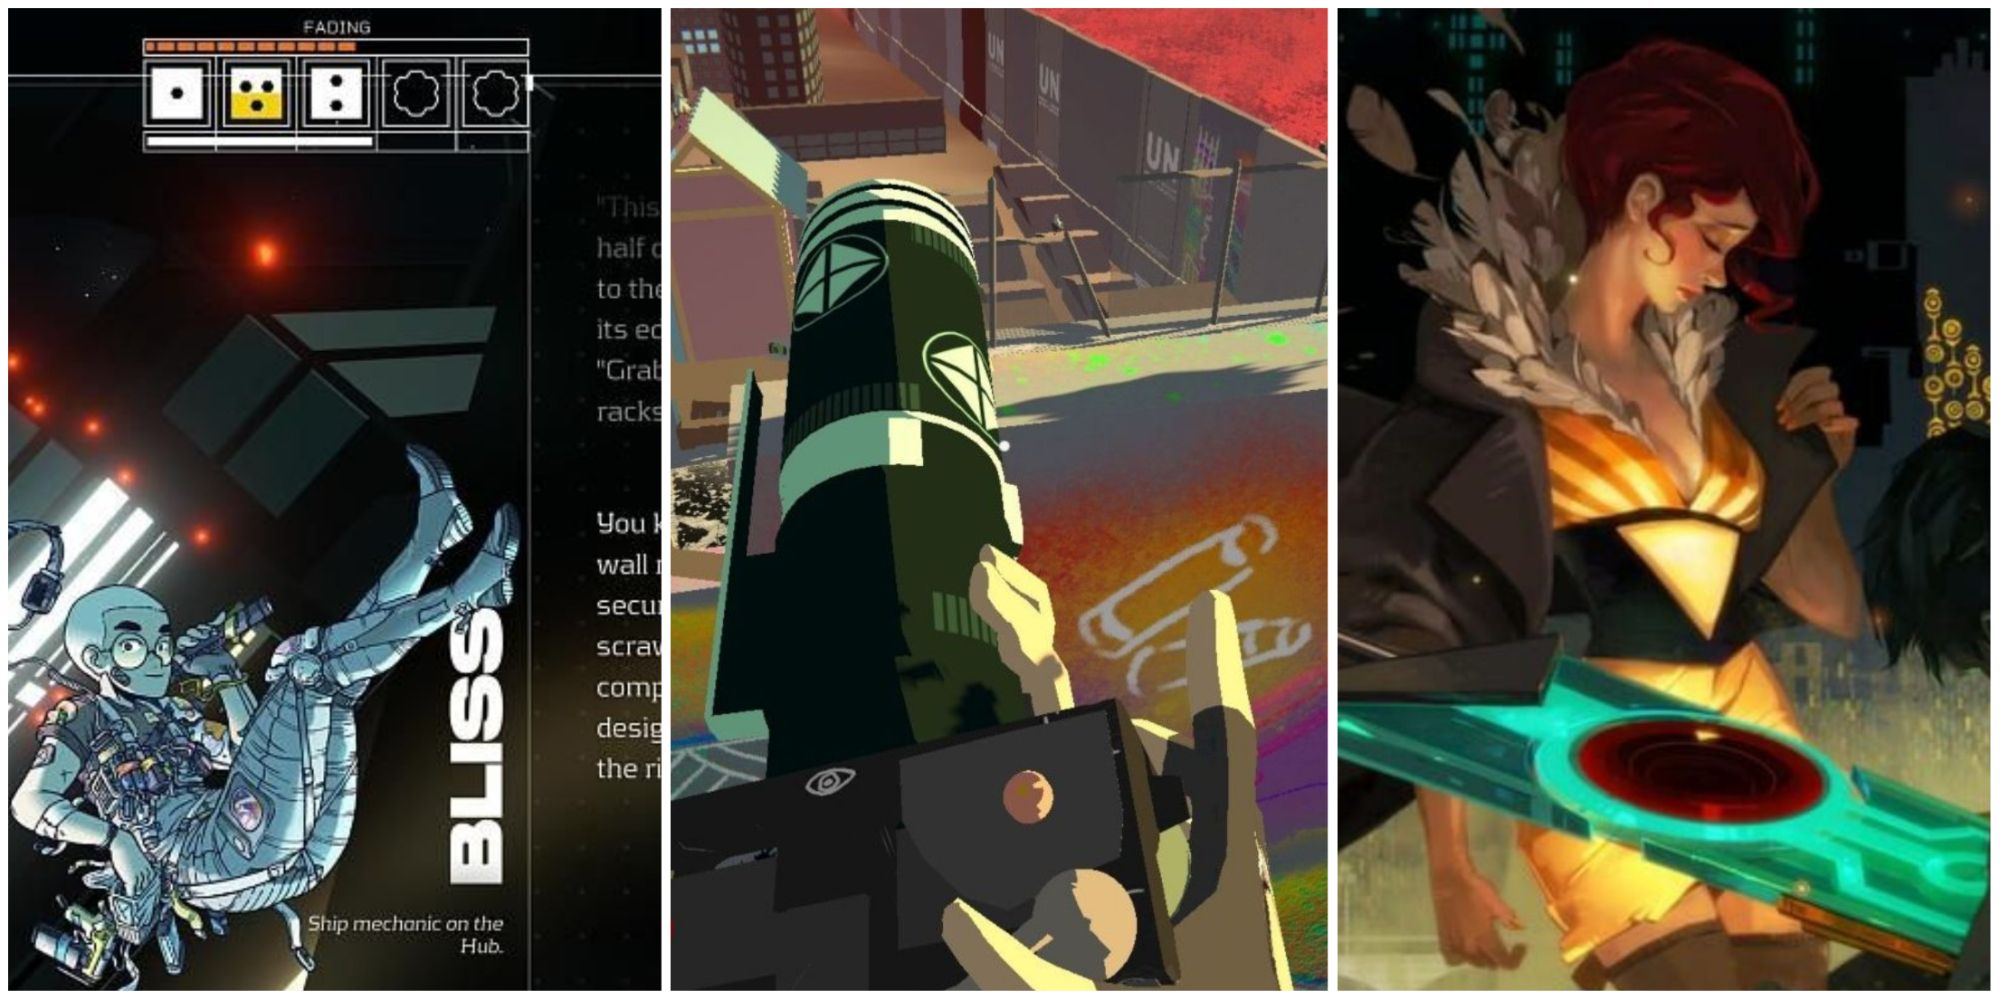 Portrait of Bliss from Citizen Sleeper, a camera being held up close in Umurangi Generation, and artwork of Red and the Transistor sword from Transistor, left to right